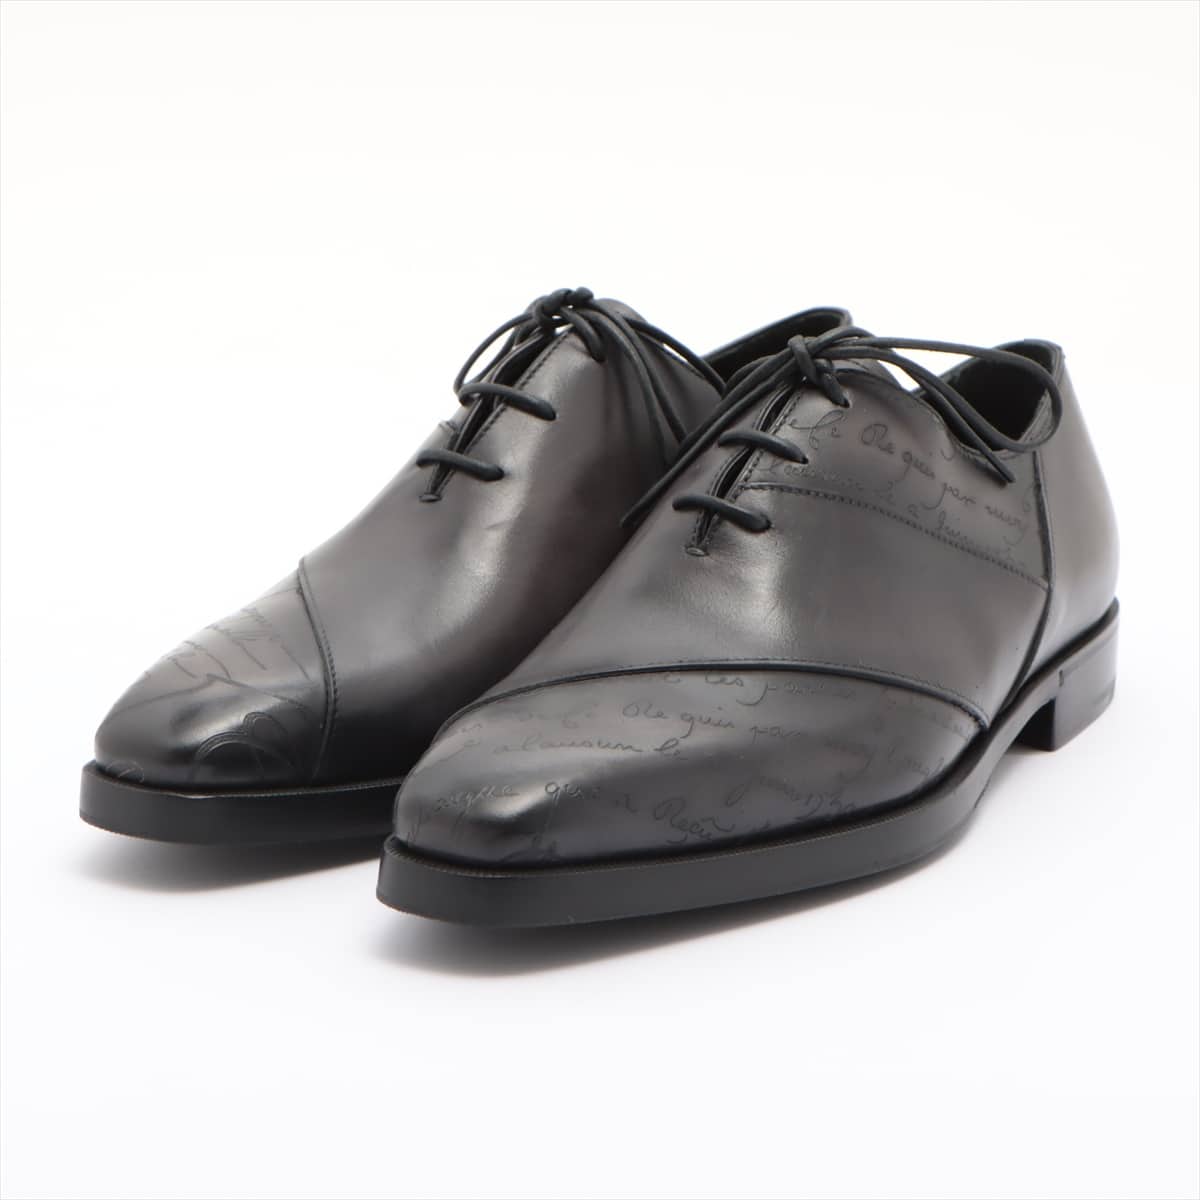 Berluti Leather Leather shoes 6 1/2 Men's Black Comes with genuine shoe keeper 5210 Patchwork Demjour